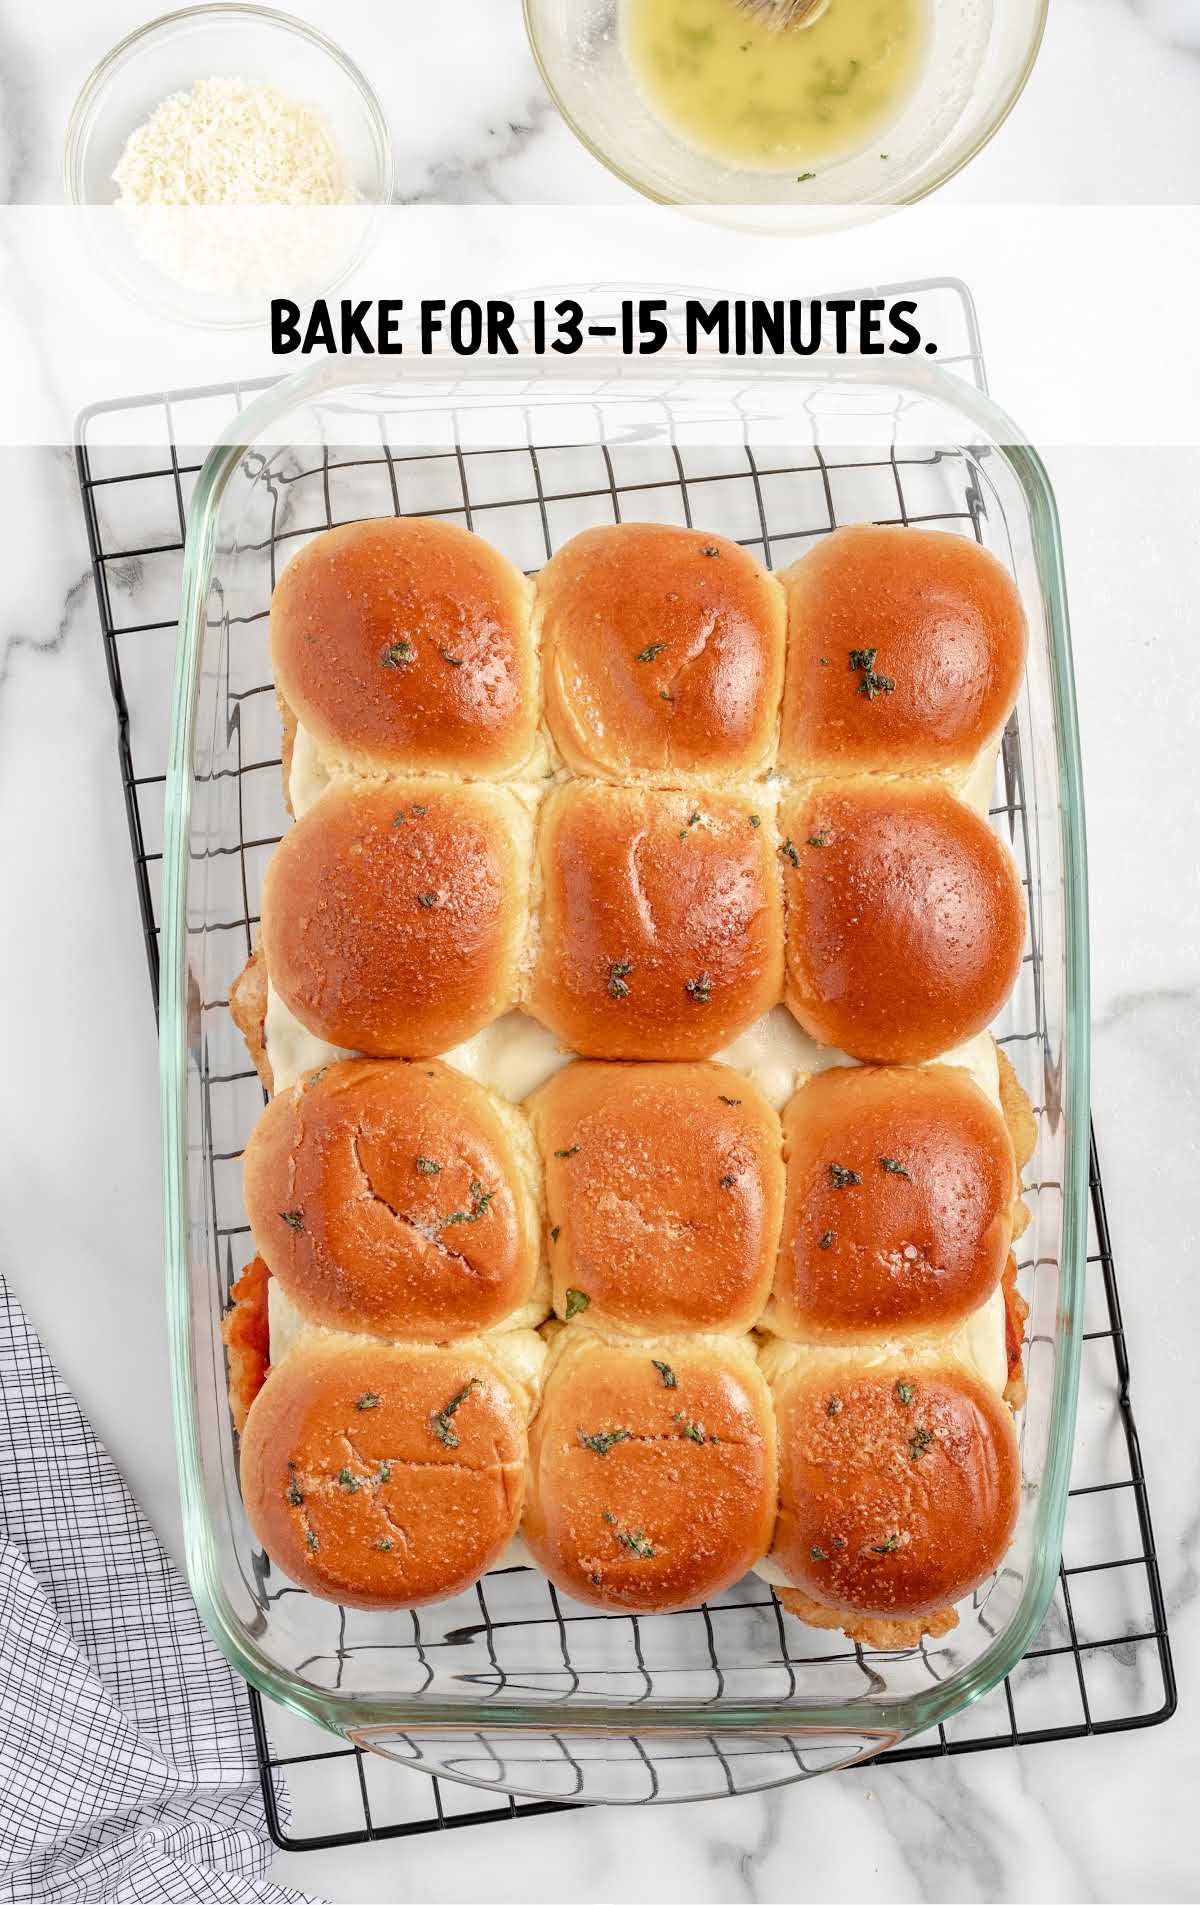 sliders baked in a baking dish